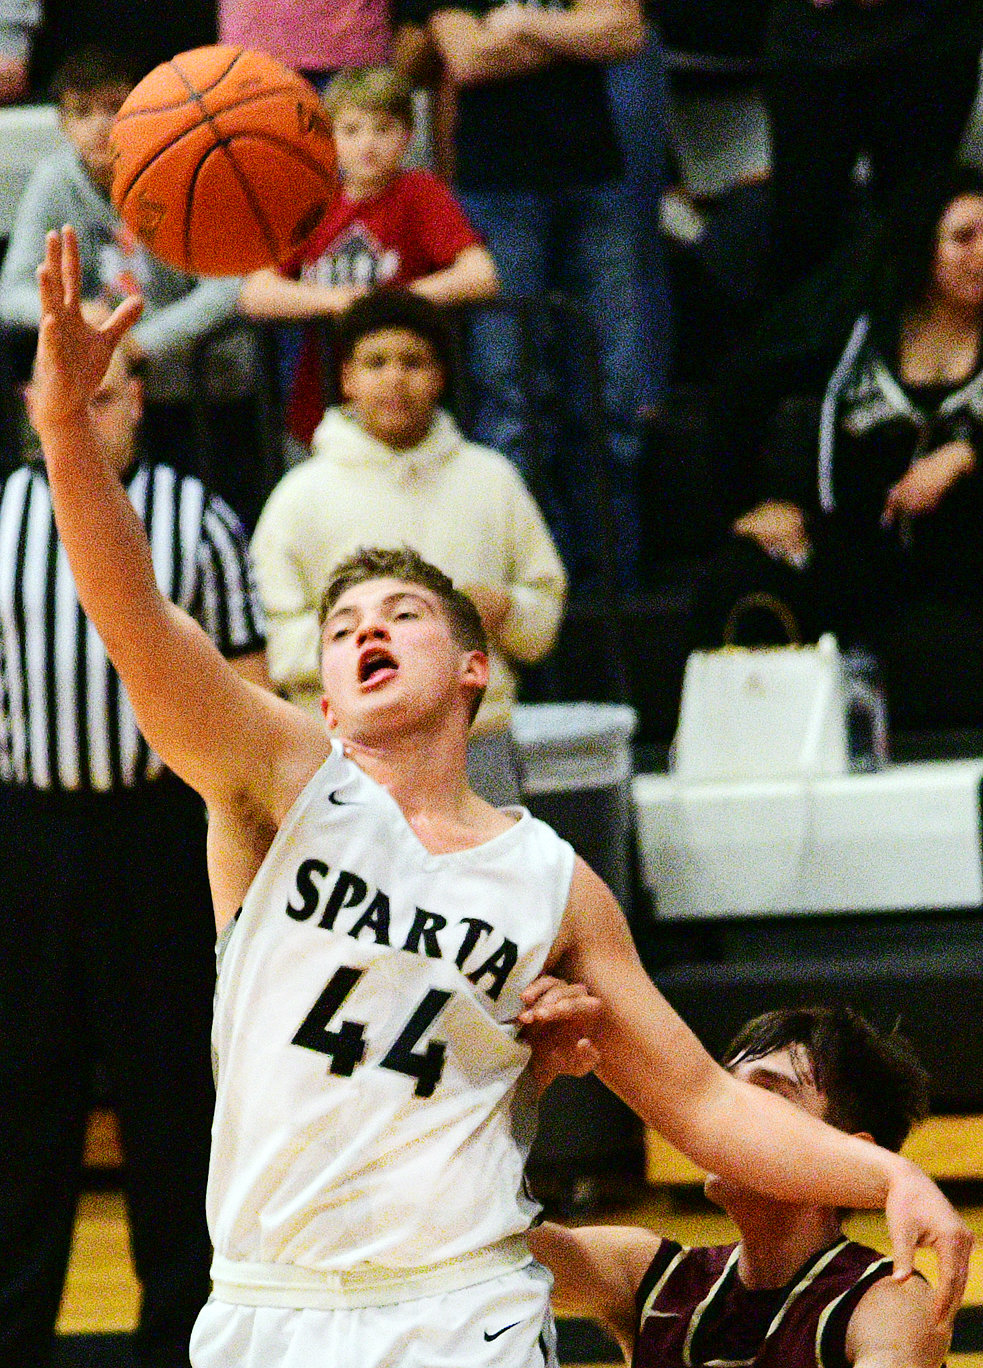 SPARTA’S DEXTER LOVELAND chases down a loose ball.